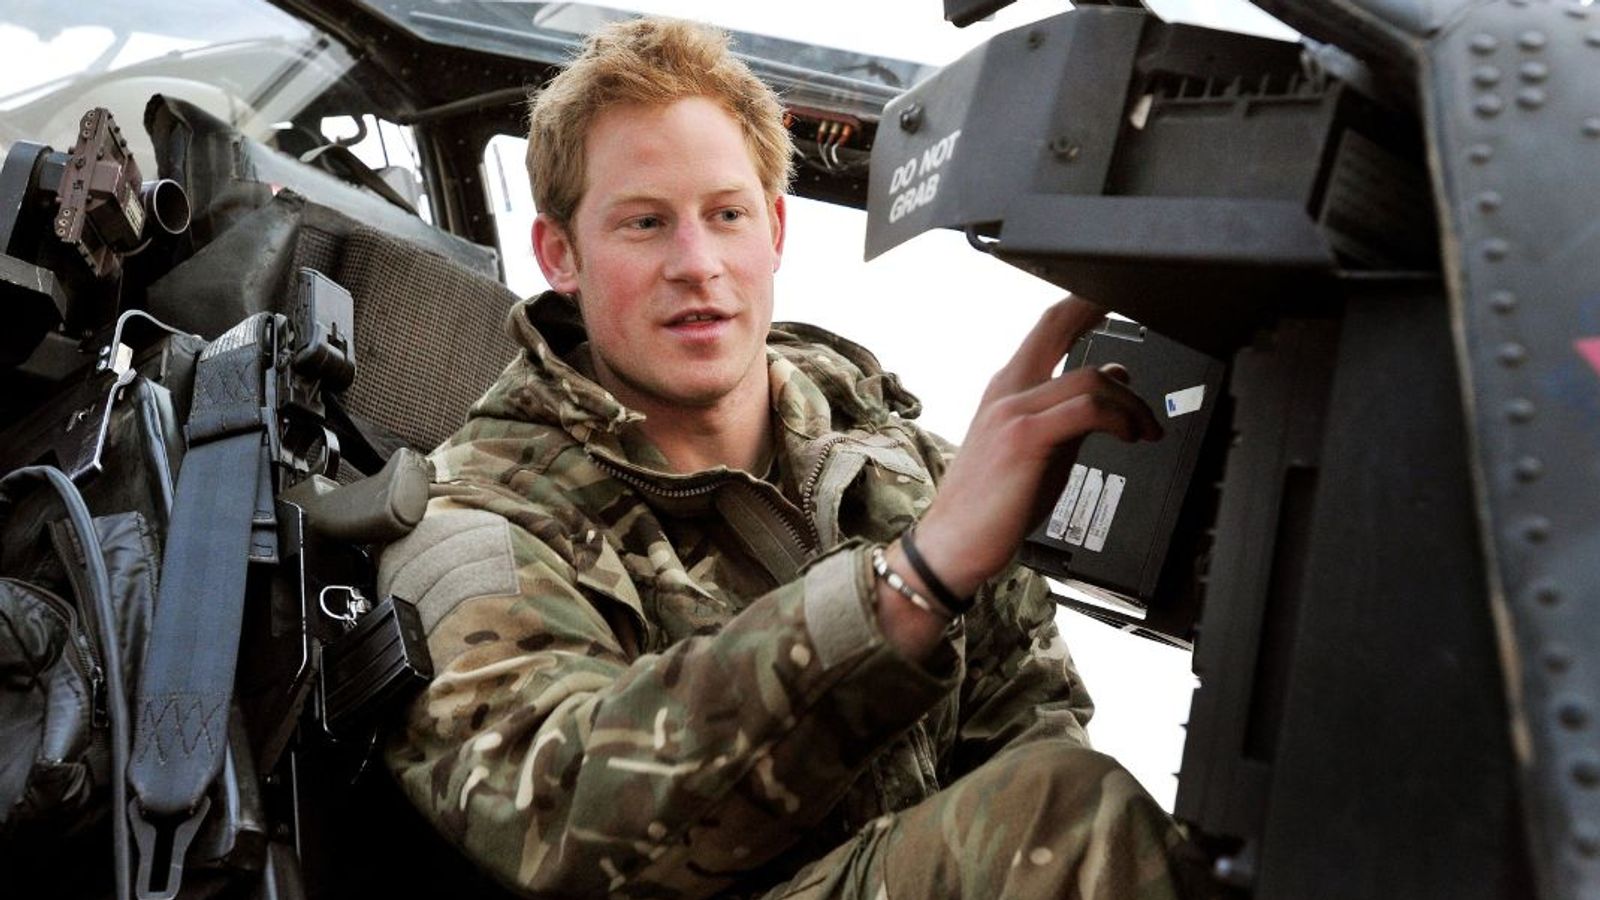 Prince Harry recognised as Living Legend of Aviation for services to British Army